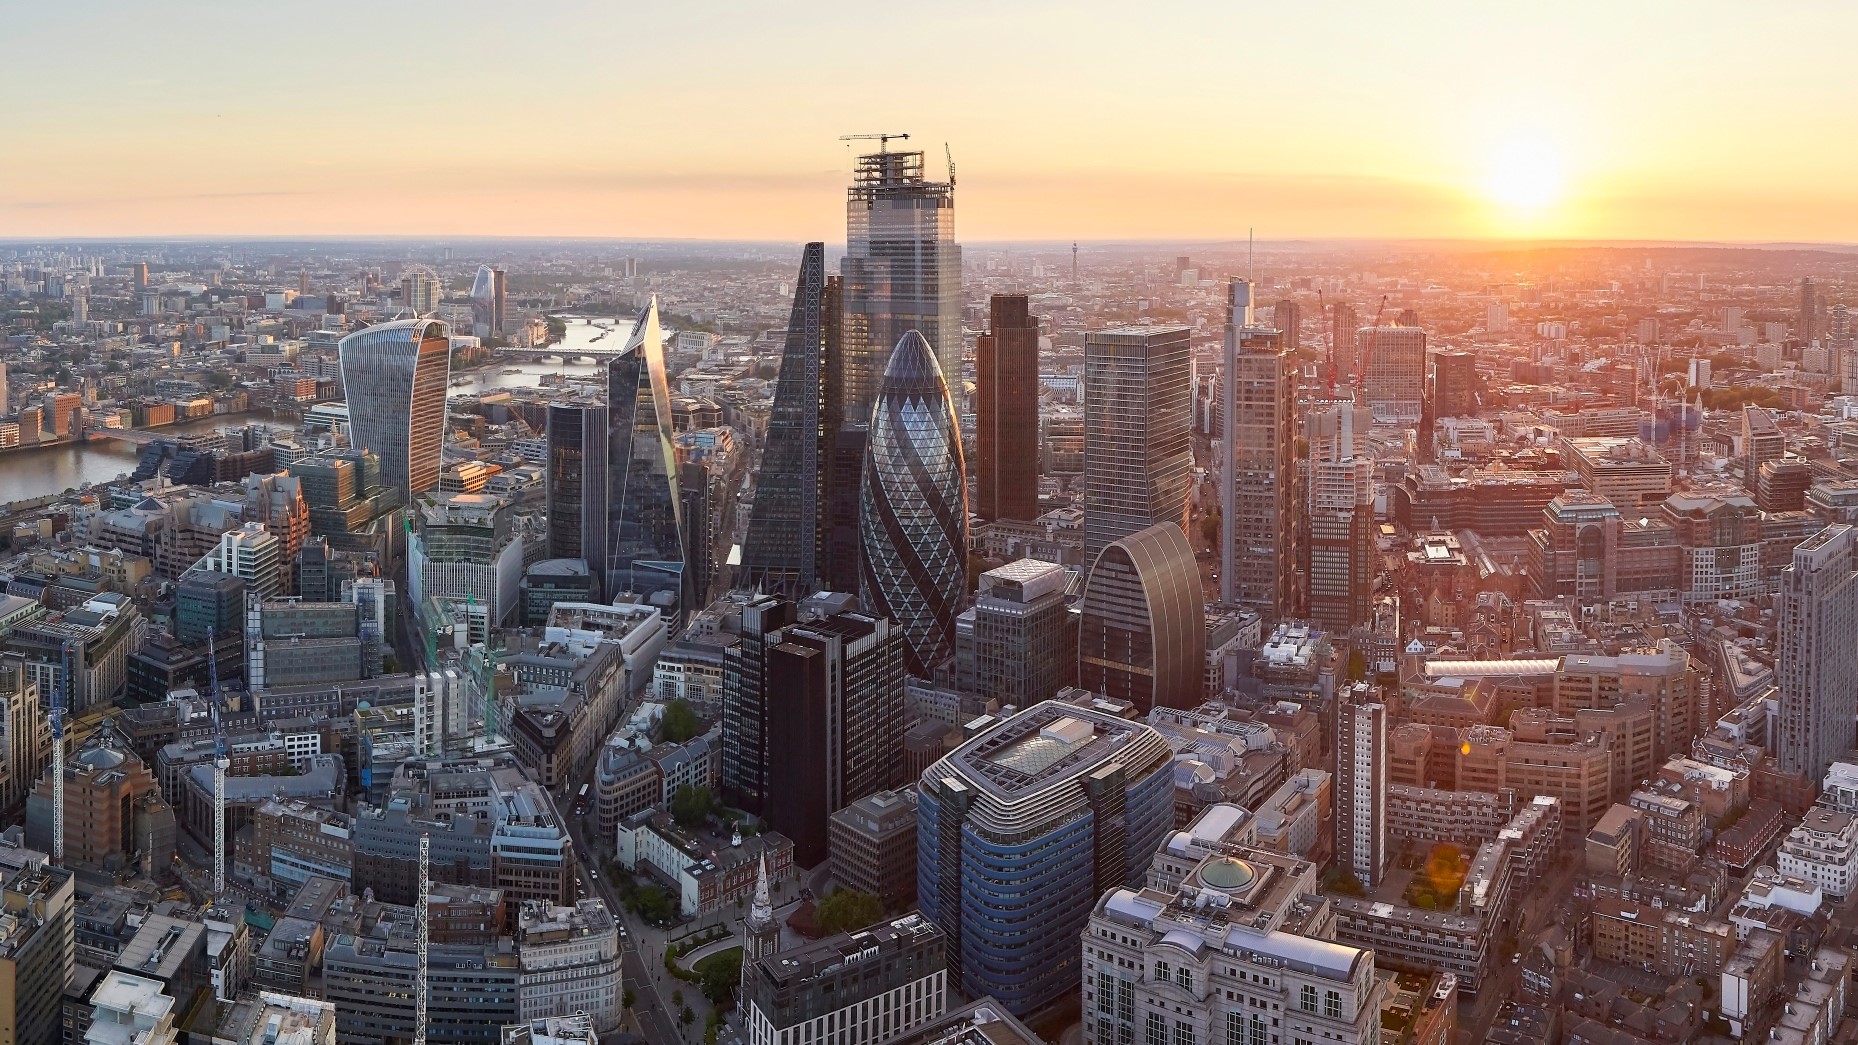 The Square Mile financial district has been put at serious risk by Brexit. Photo: View Pictures/Hufton+ Crow/Universal Images/Getty